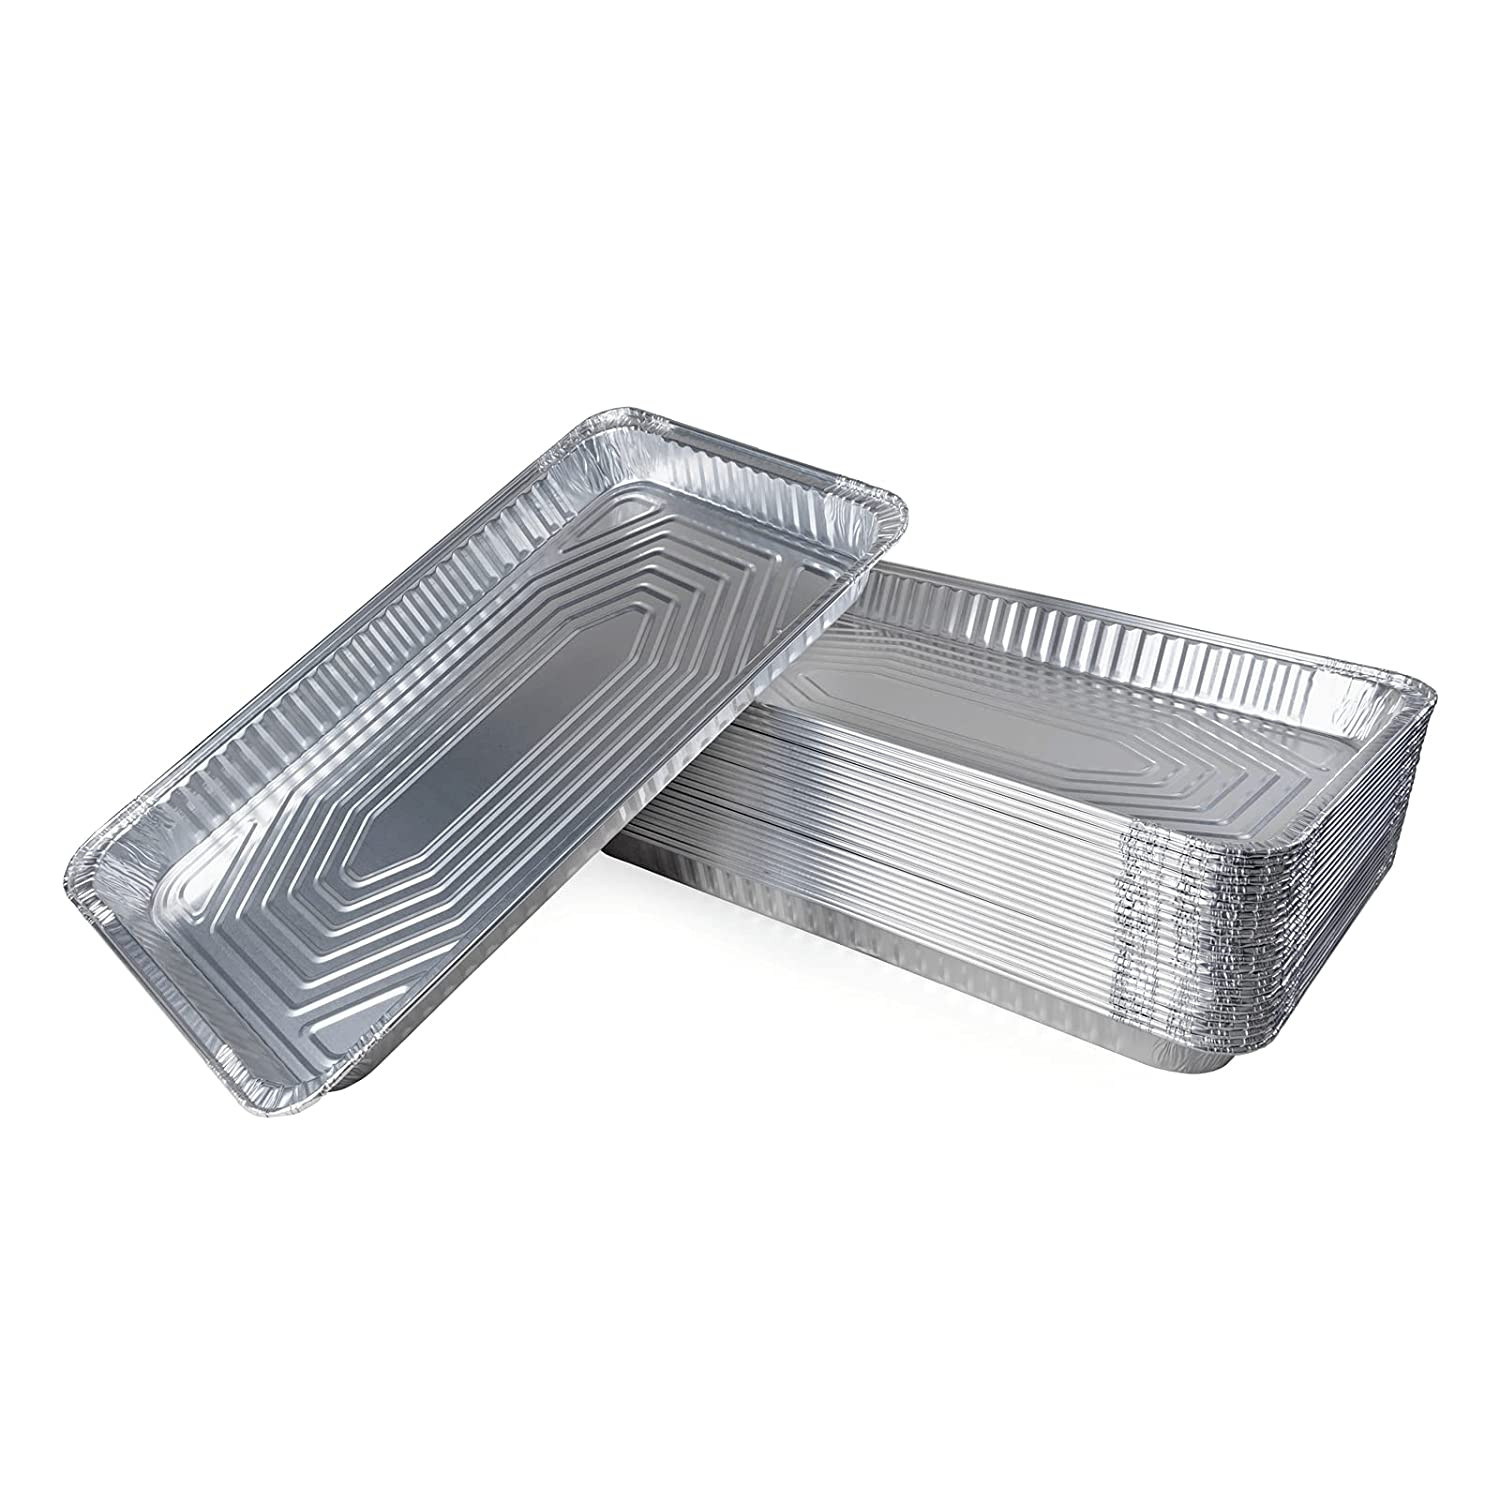 https://idlpack.com/image/cache/catalog/Products/Foil%20Pans%20and%20Trays/71Rg5D7P+kL._SL1500_-1500x1500.jpg